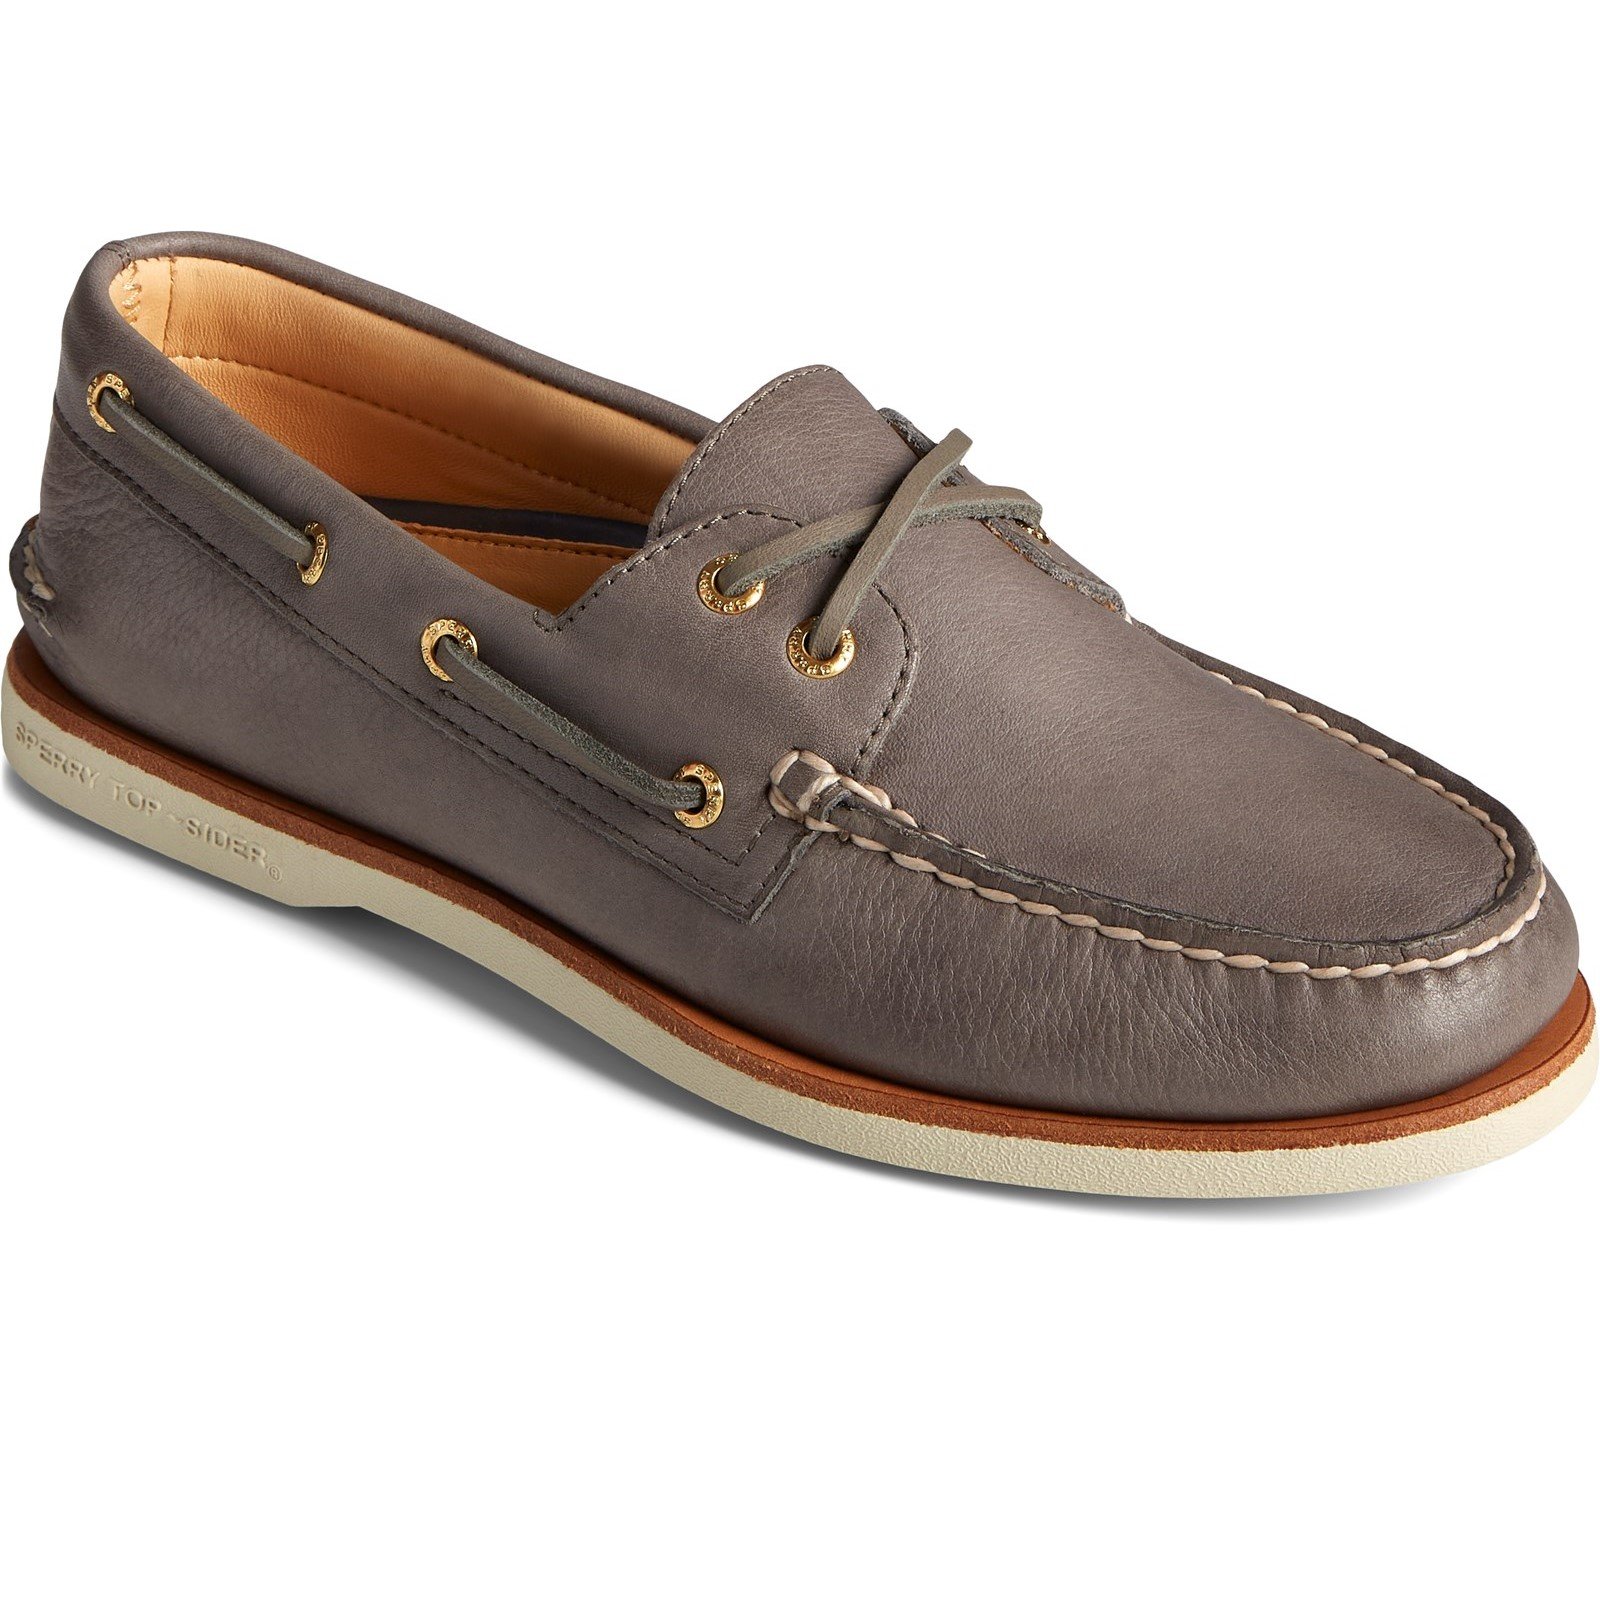 Sperry Men's A/O 2-Eye Boat Shoe Various Colours 32926 - Charcoal 8.5